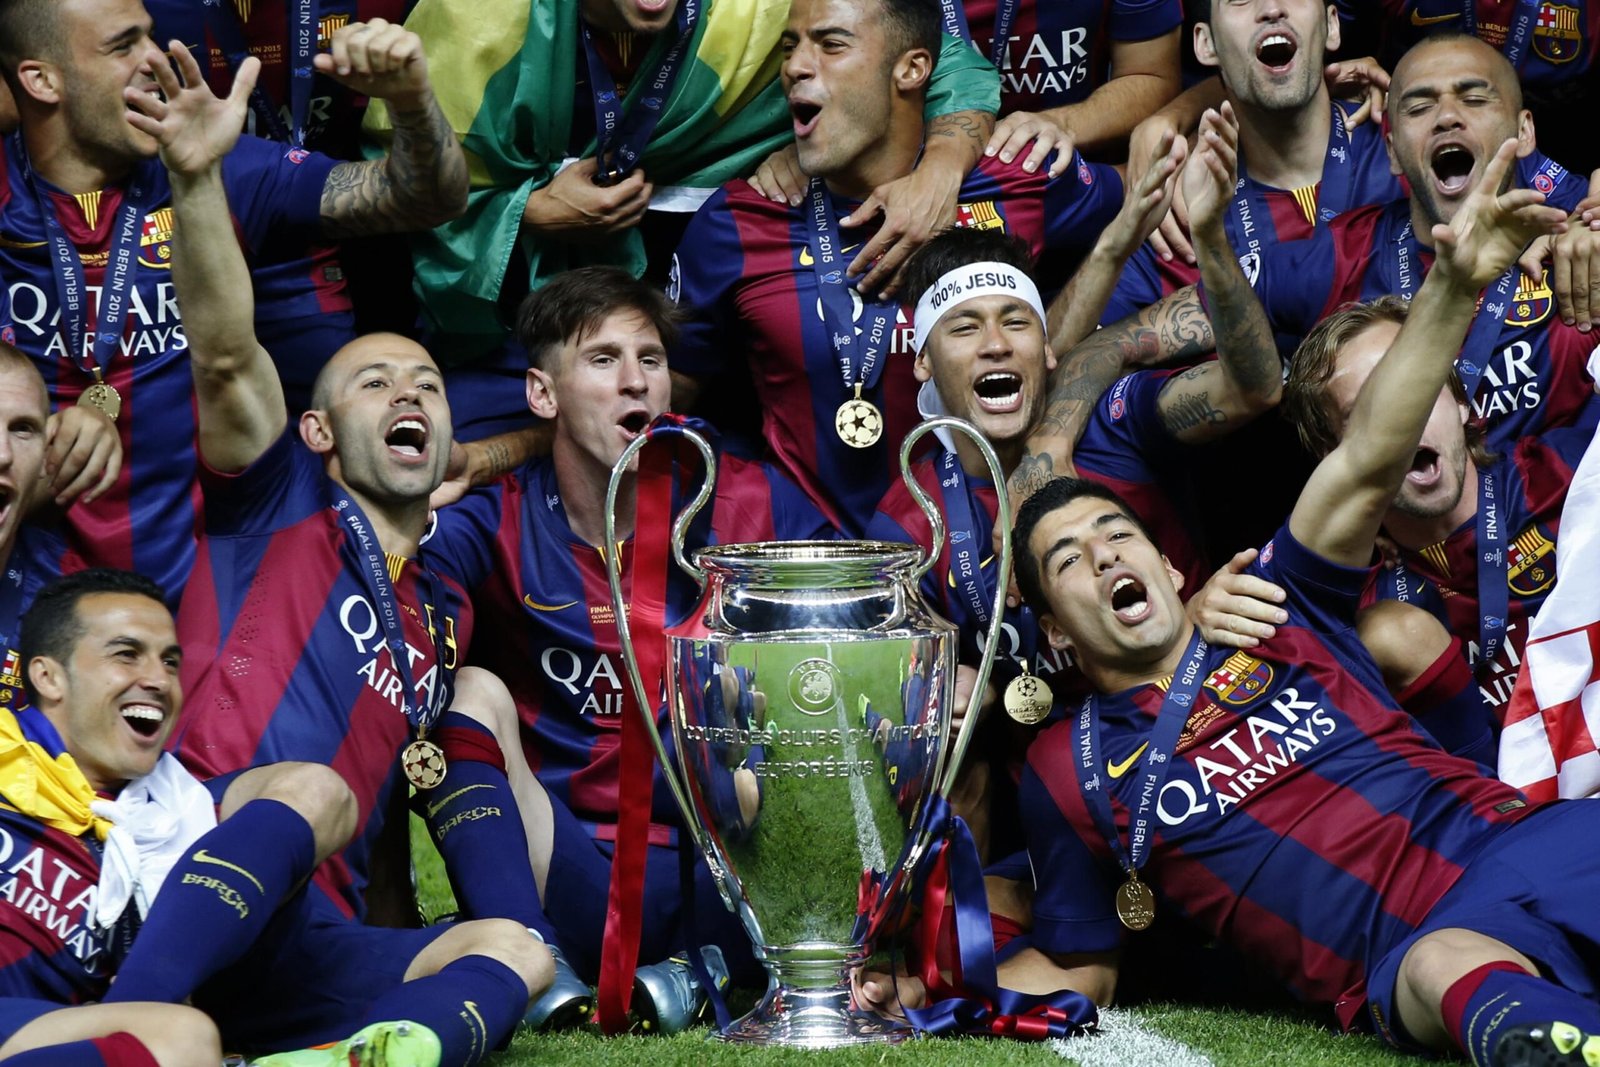 MSN lead Barcelona to their 5th Champions League Trophy